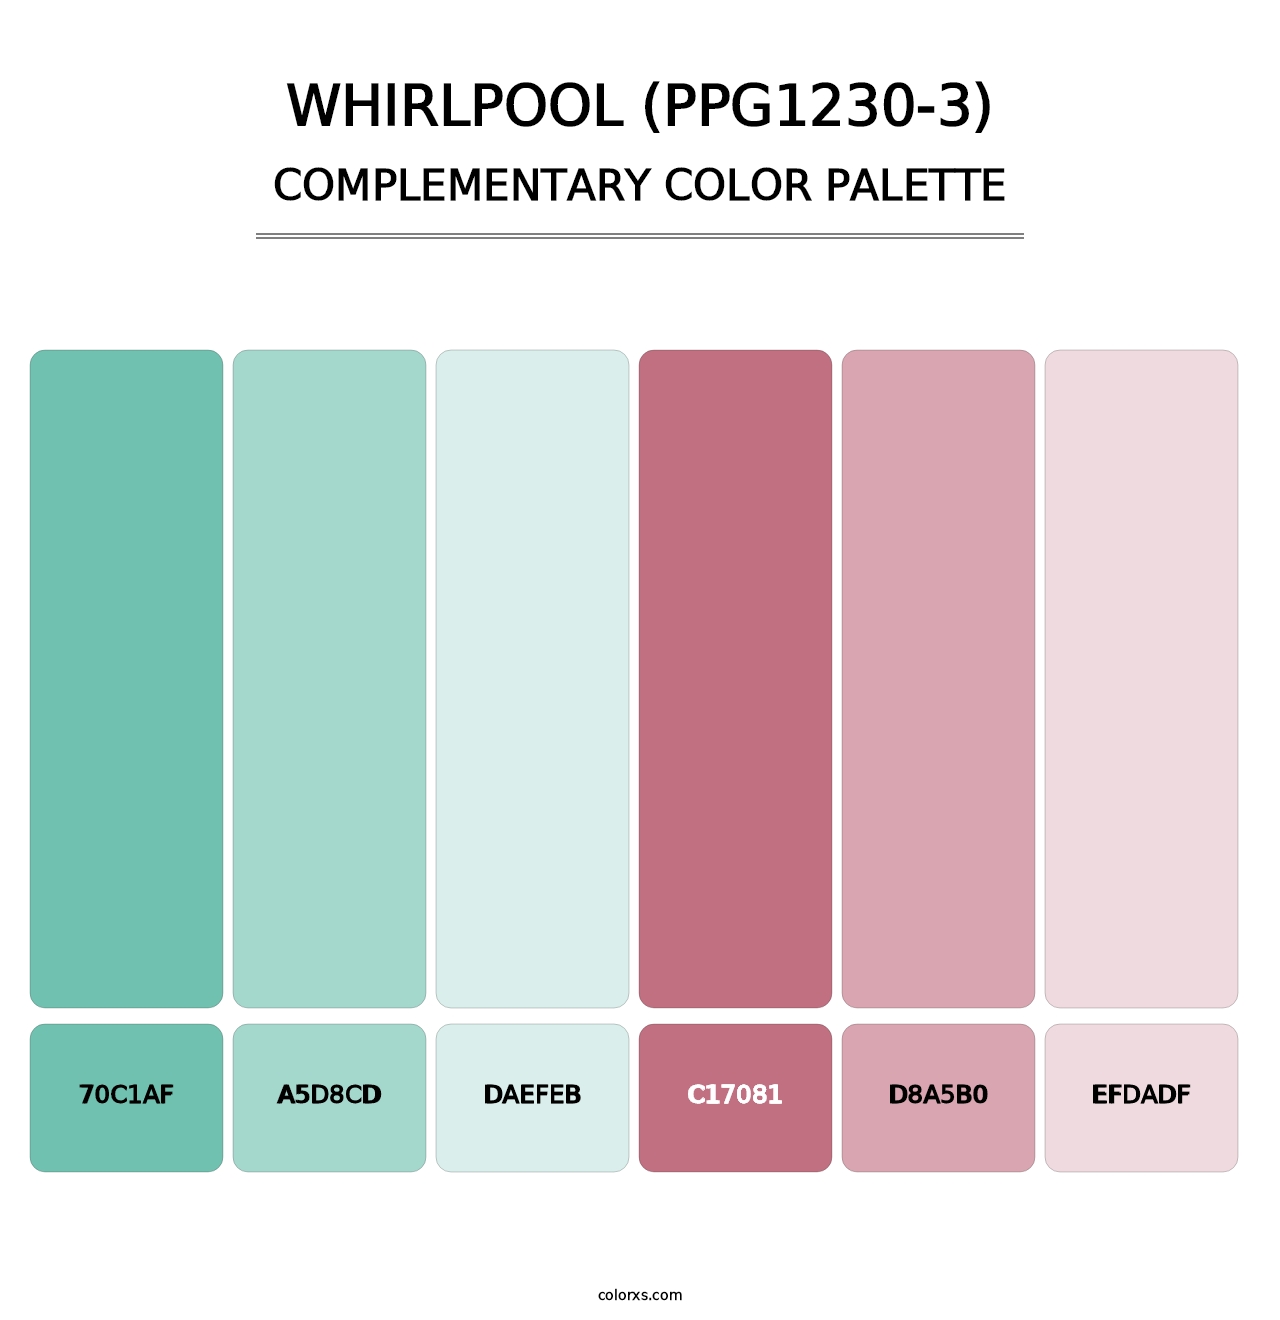 Whirlpool (PPG1230-3) - Complementary Color Palette